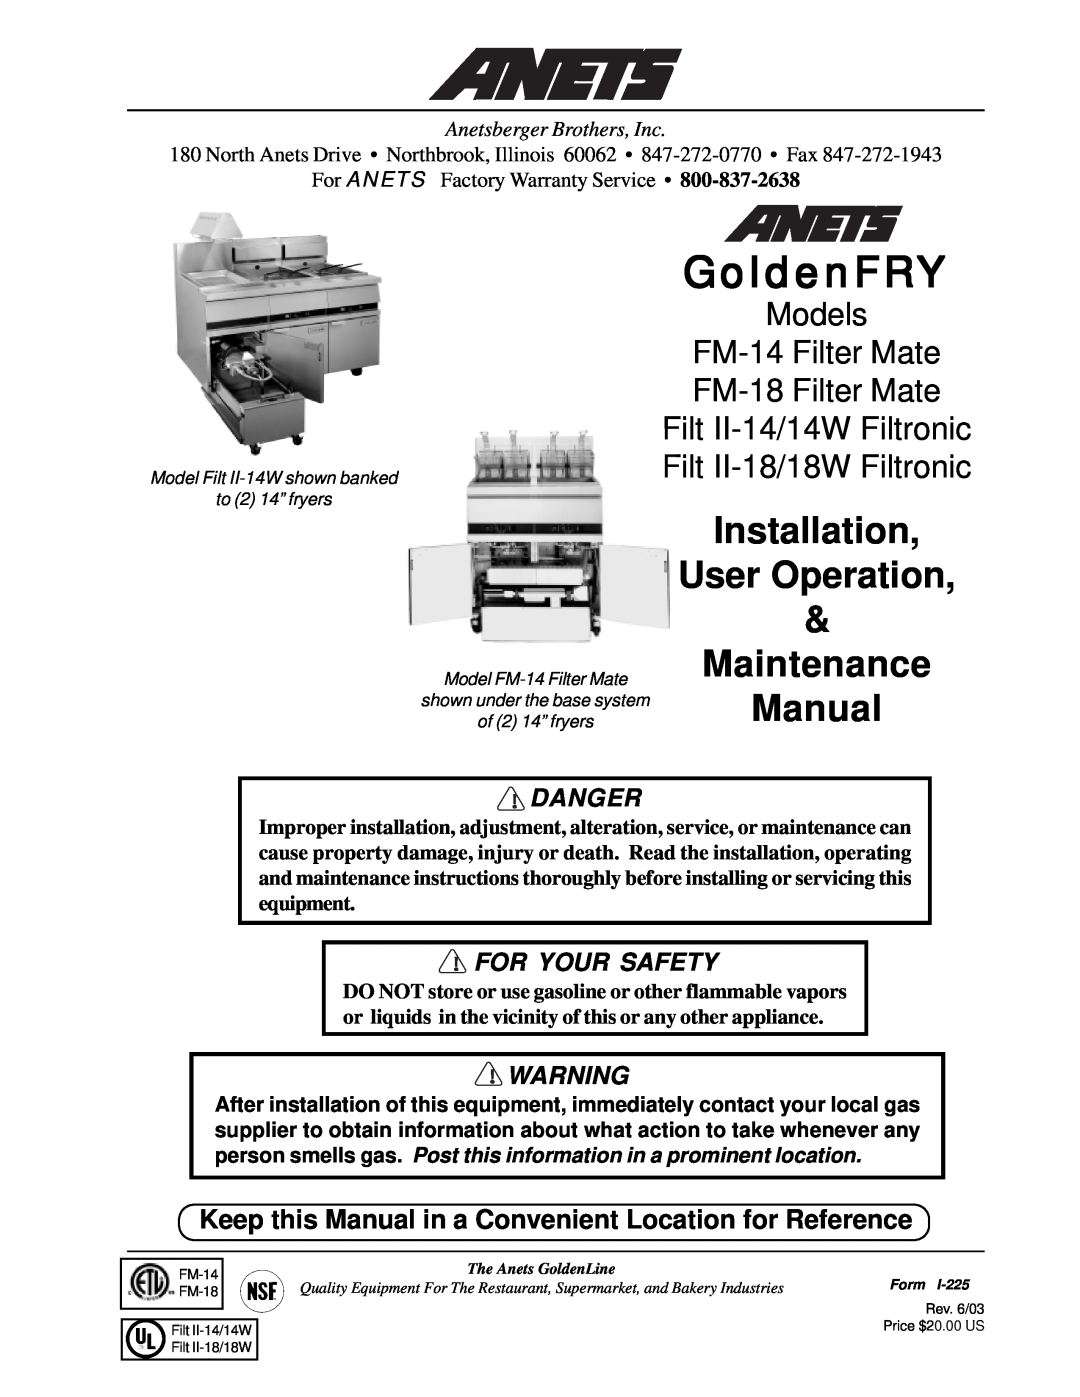 Anetsberger Brothers FM-14 warranty Danger, For Your Safety, Anetsberger Brothers, Inc, GoldenFRY 